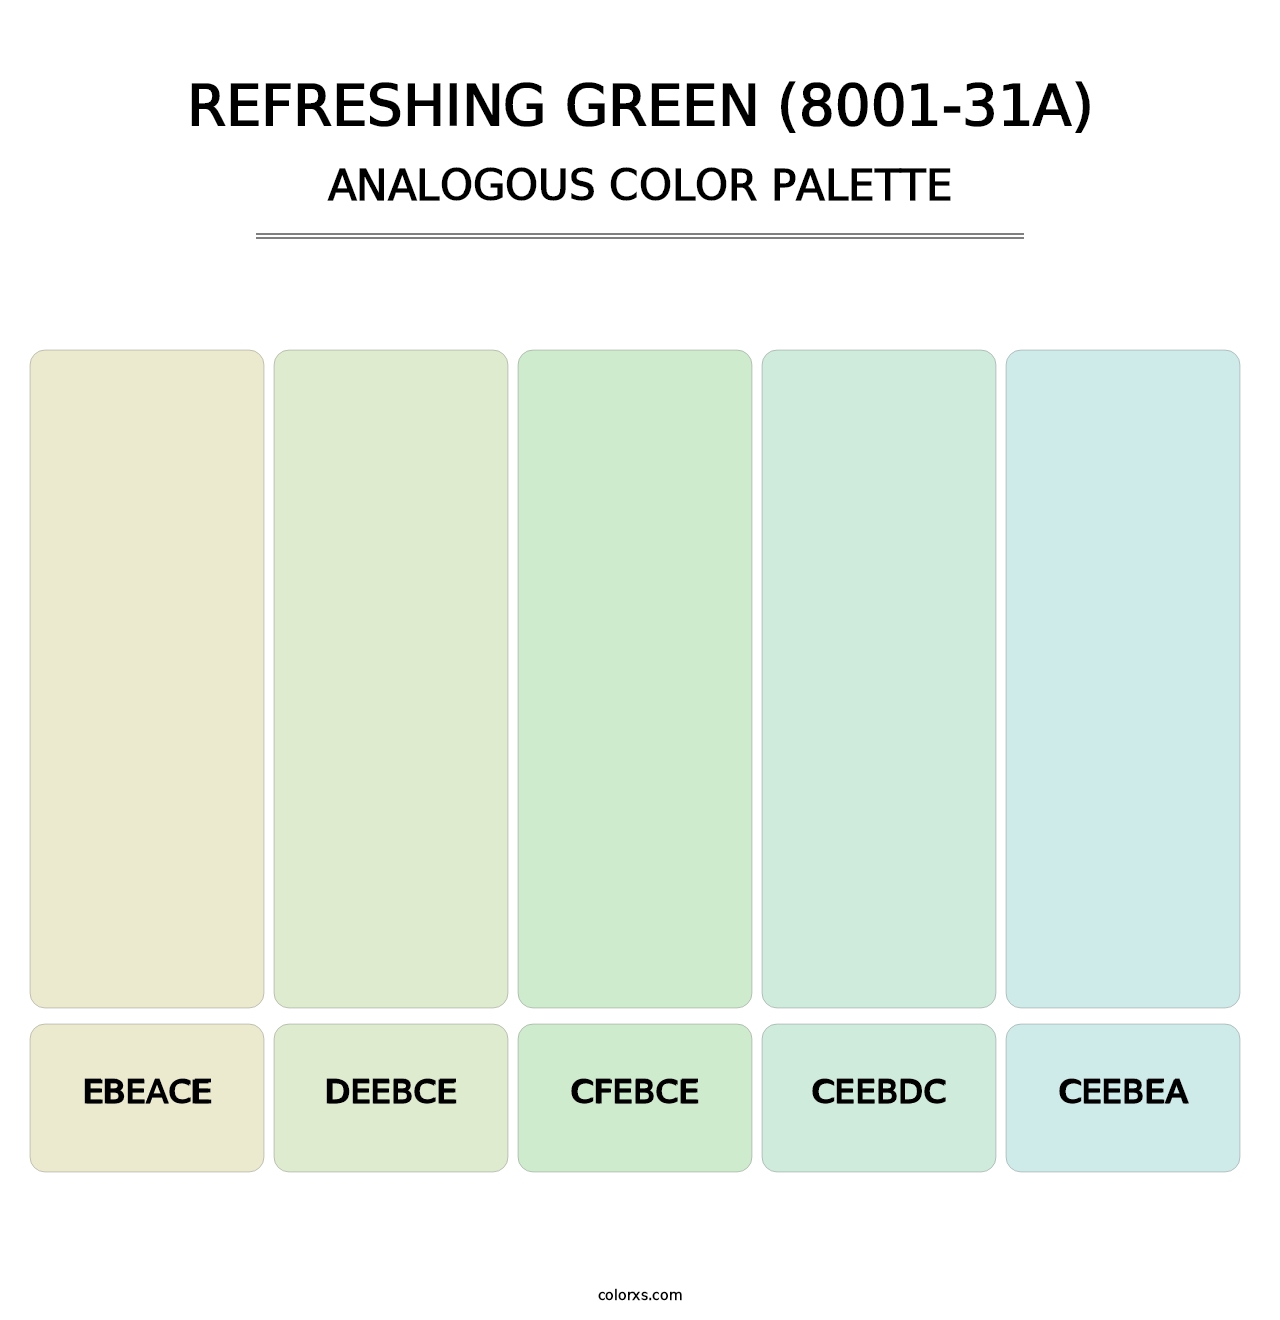 Refreshing Green (8001-31A) - Analogous Color Palette